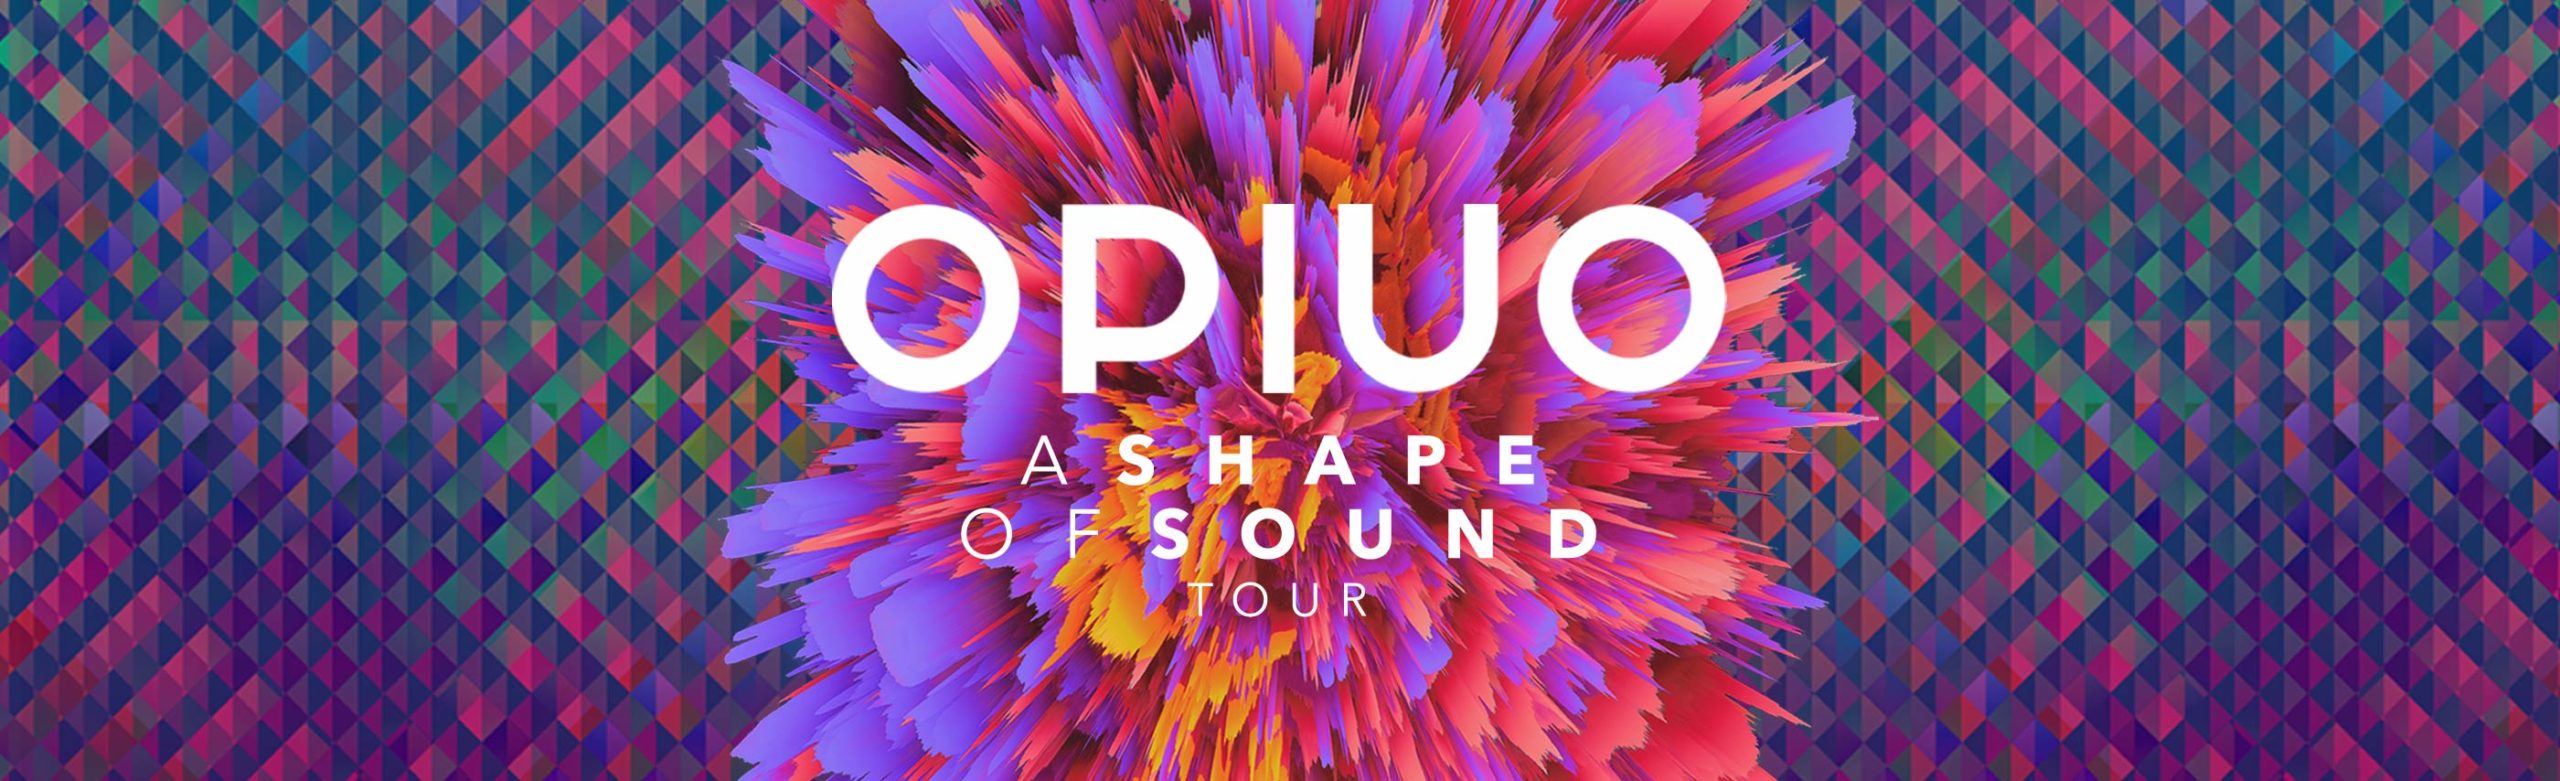 Win Tickets to Opiuo in Montana at The ELM or The Wilma Image